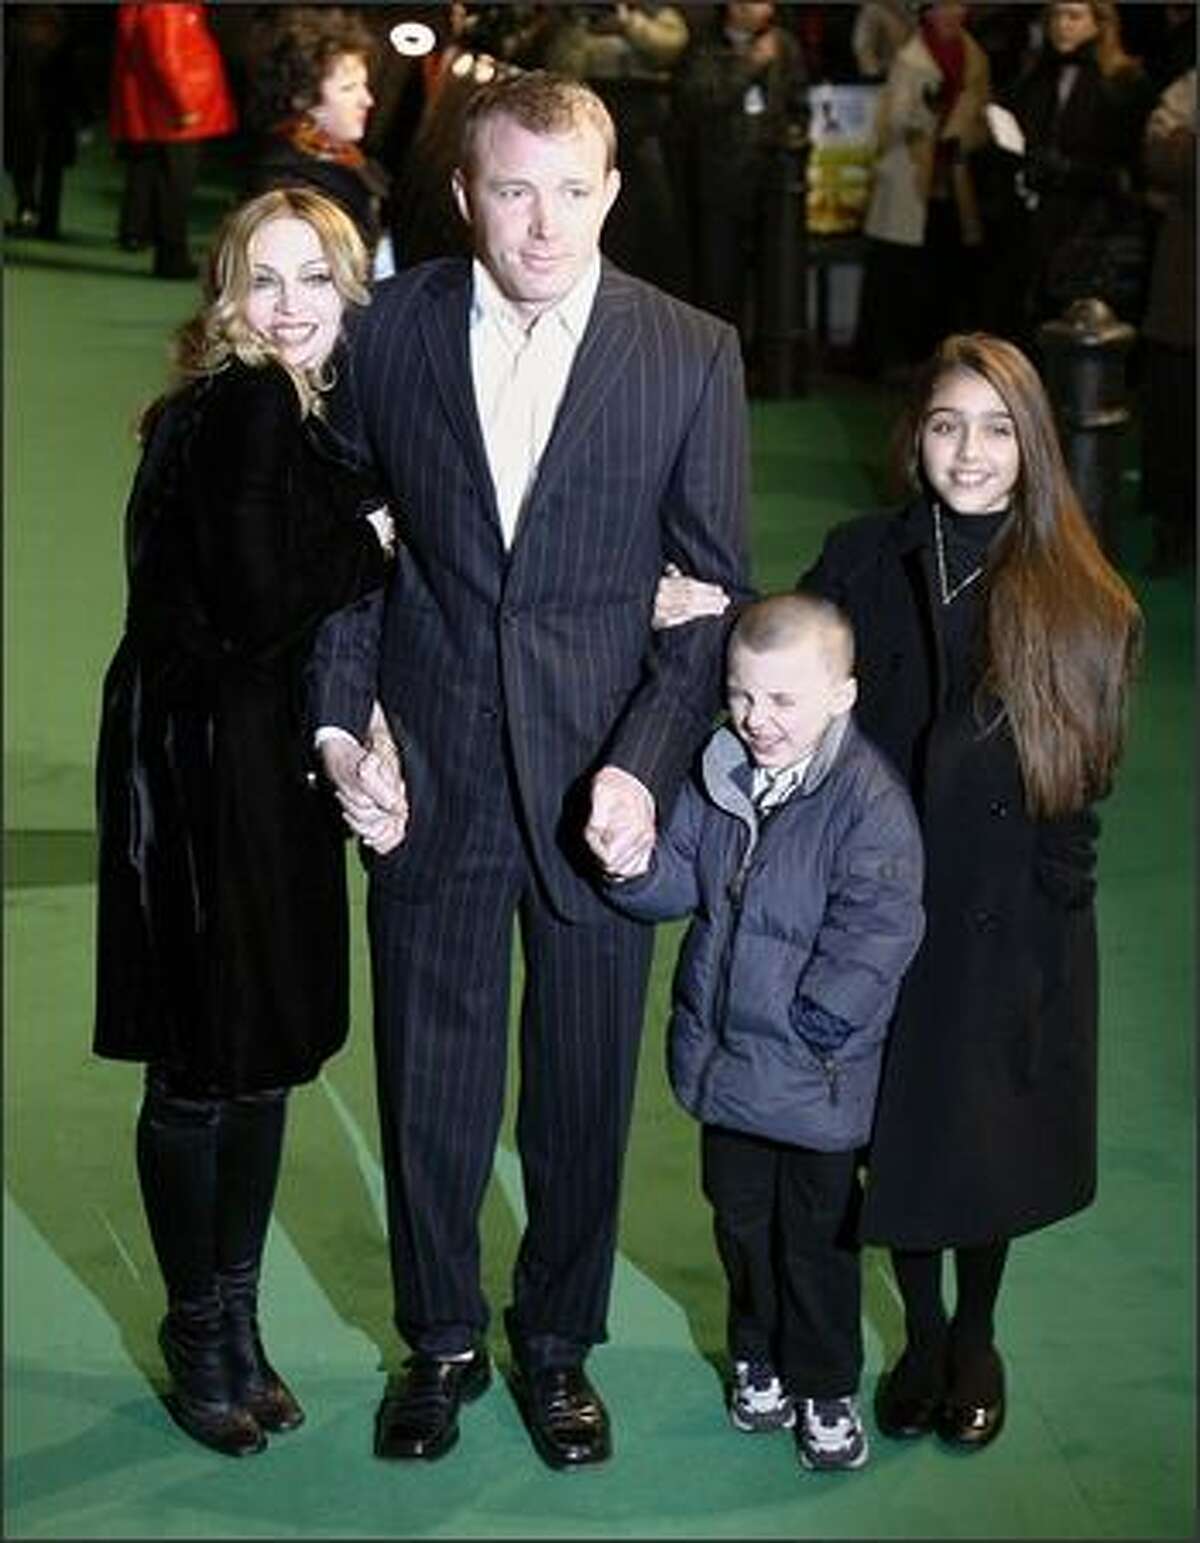 Madonna and then-husband Guy Ritchie stand with their children Rocco and Lourdes as they attend the premiere of the film "Arthur and the Invisibles" in Leicester Square, London, Jan. 25, 2007.